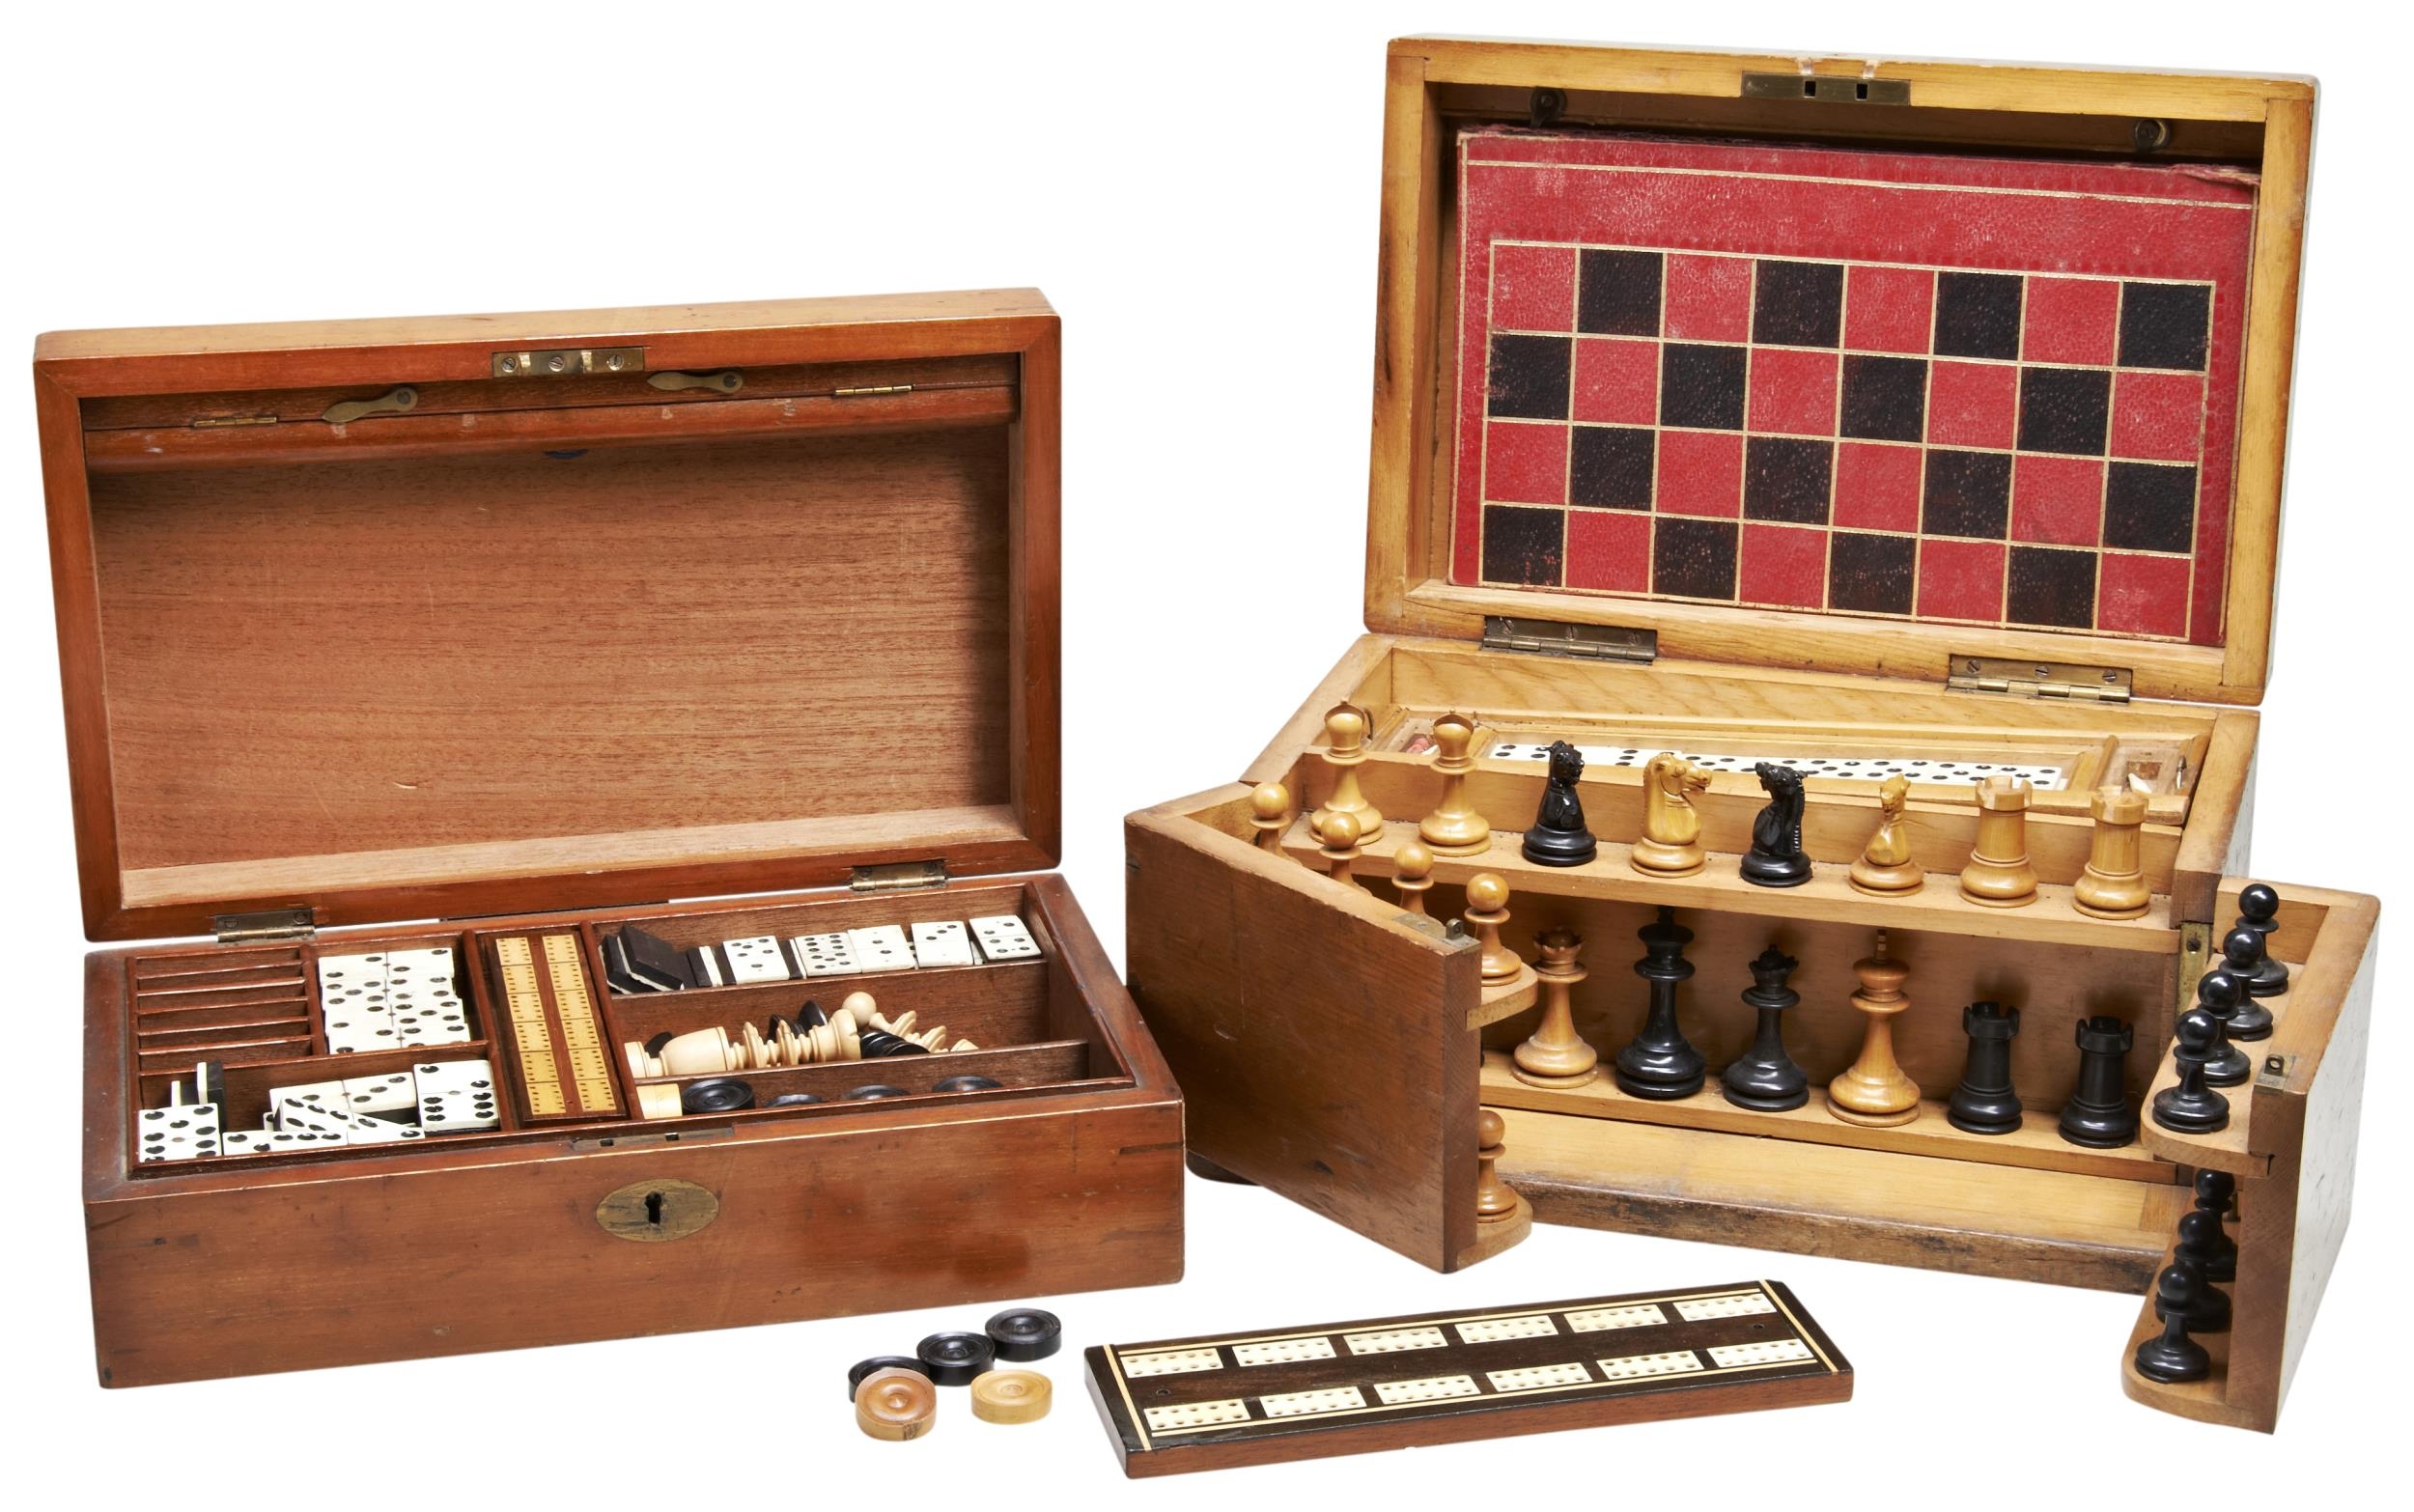 AN EDWARDIAN FOLD-OUT GAMES COMPENDIUM with chess etc (one pawn missing) and another